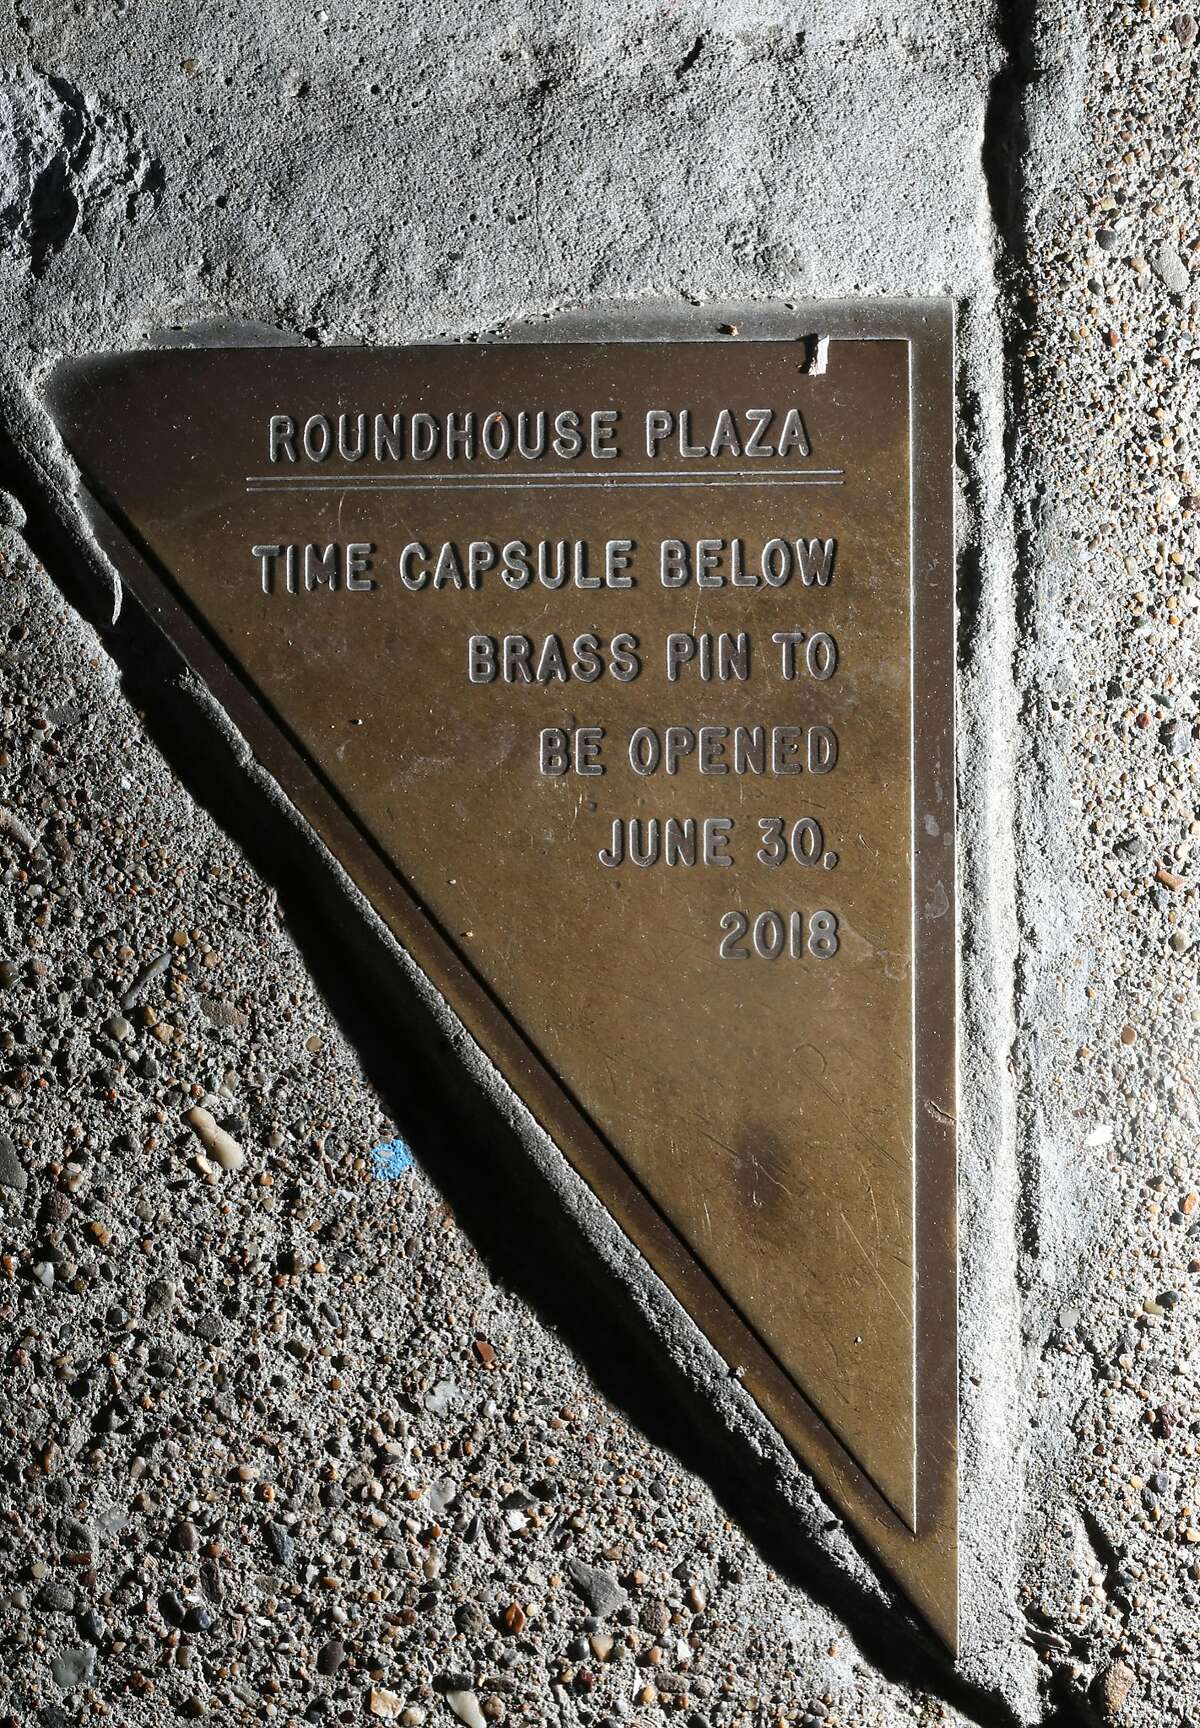 Helen Goldsmith started noticing this little plaque on the corner sidewalk next to 1500 Sansome Street three years ago while taking neighborhood walks that can be seen on Wednesday, June 13, 2018 in San Francisco, Calif.